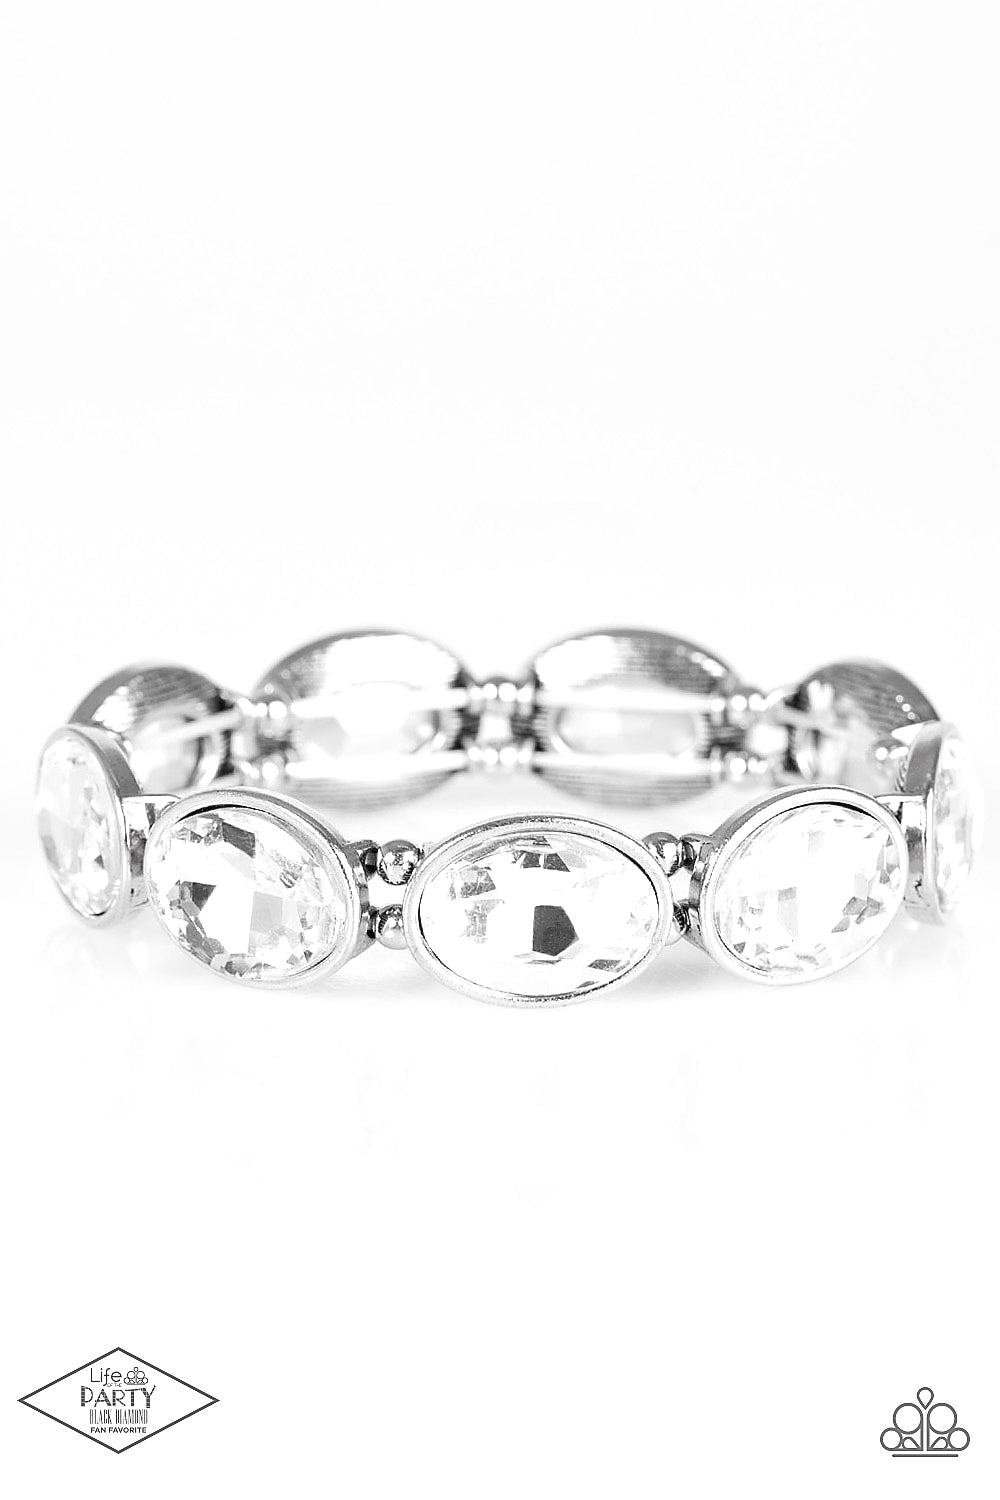 Paparazzi DIVA In Disguise - White Bracelet - Life of the Party - A Finishing Touch Jewelry